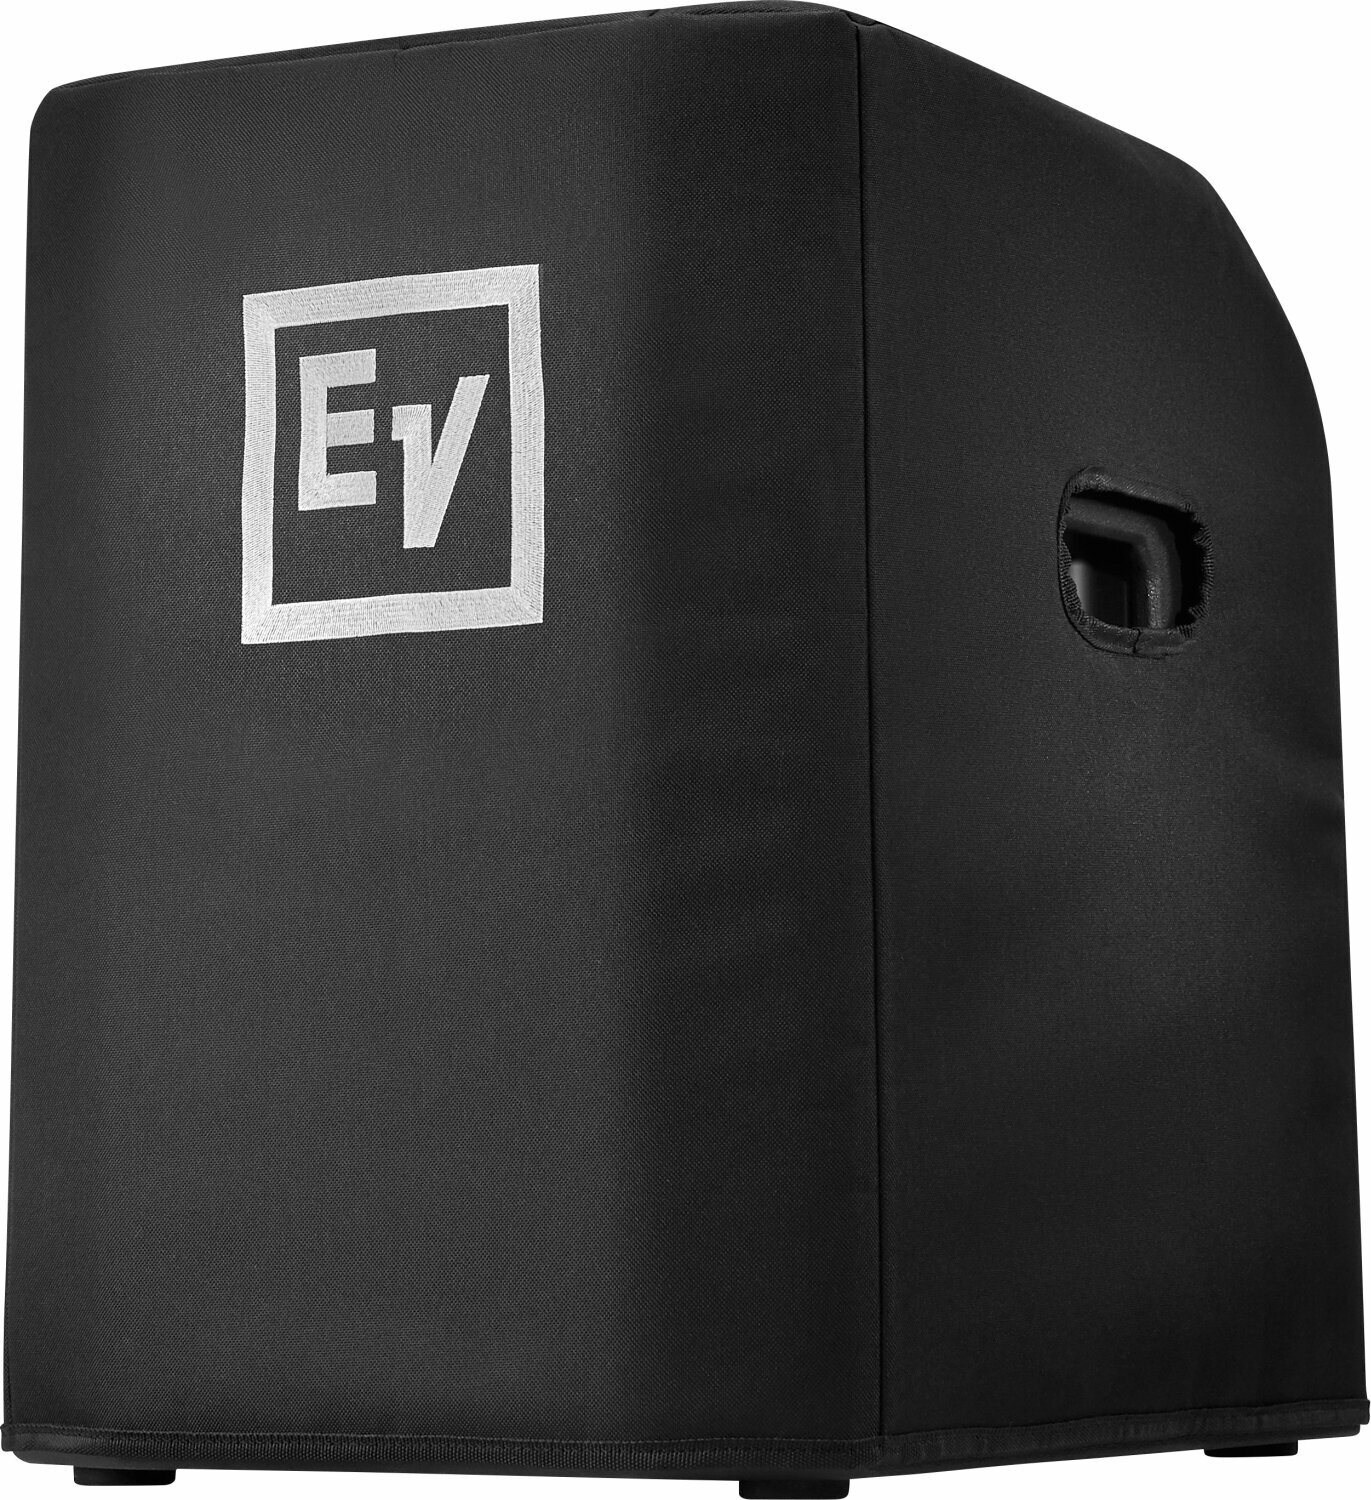 Photos - Speakers Electro-Voice Electro Voice Electro Voice EVOLVE 50- SUBCVR Bag for subwoofers EVOLVE50 